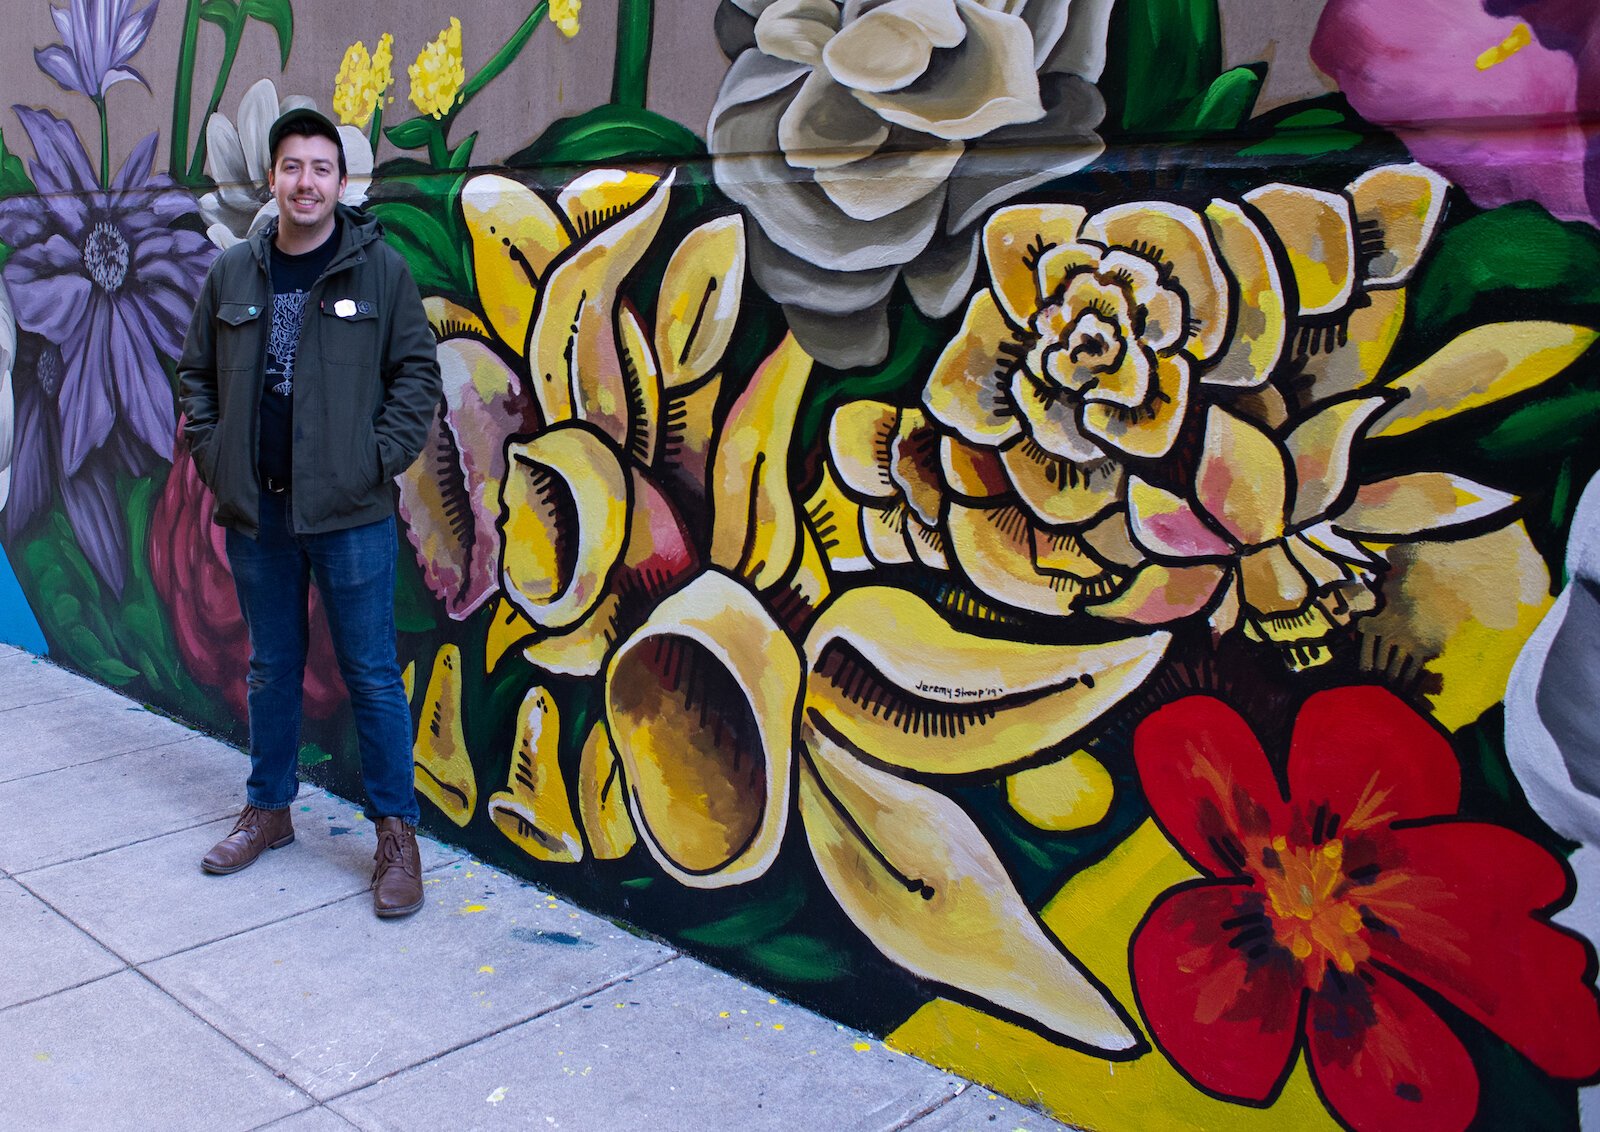 Jeremy Stroup stands in front of his section of the "Hello" mural in the alley at 120 W. Wayne St. in downtown Fort Wayne, led by artist Shawn Dunwoody.